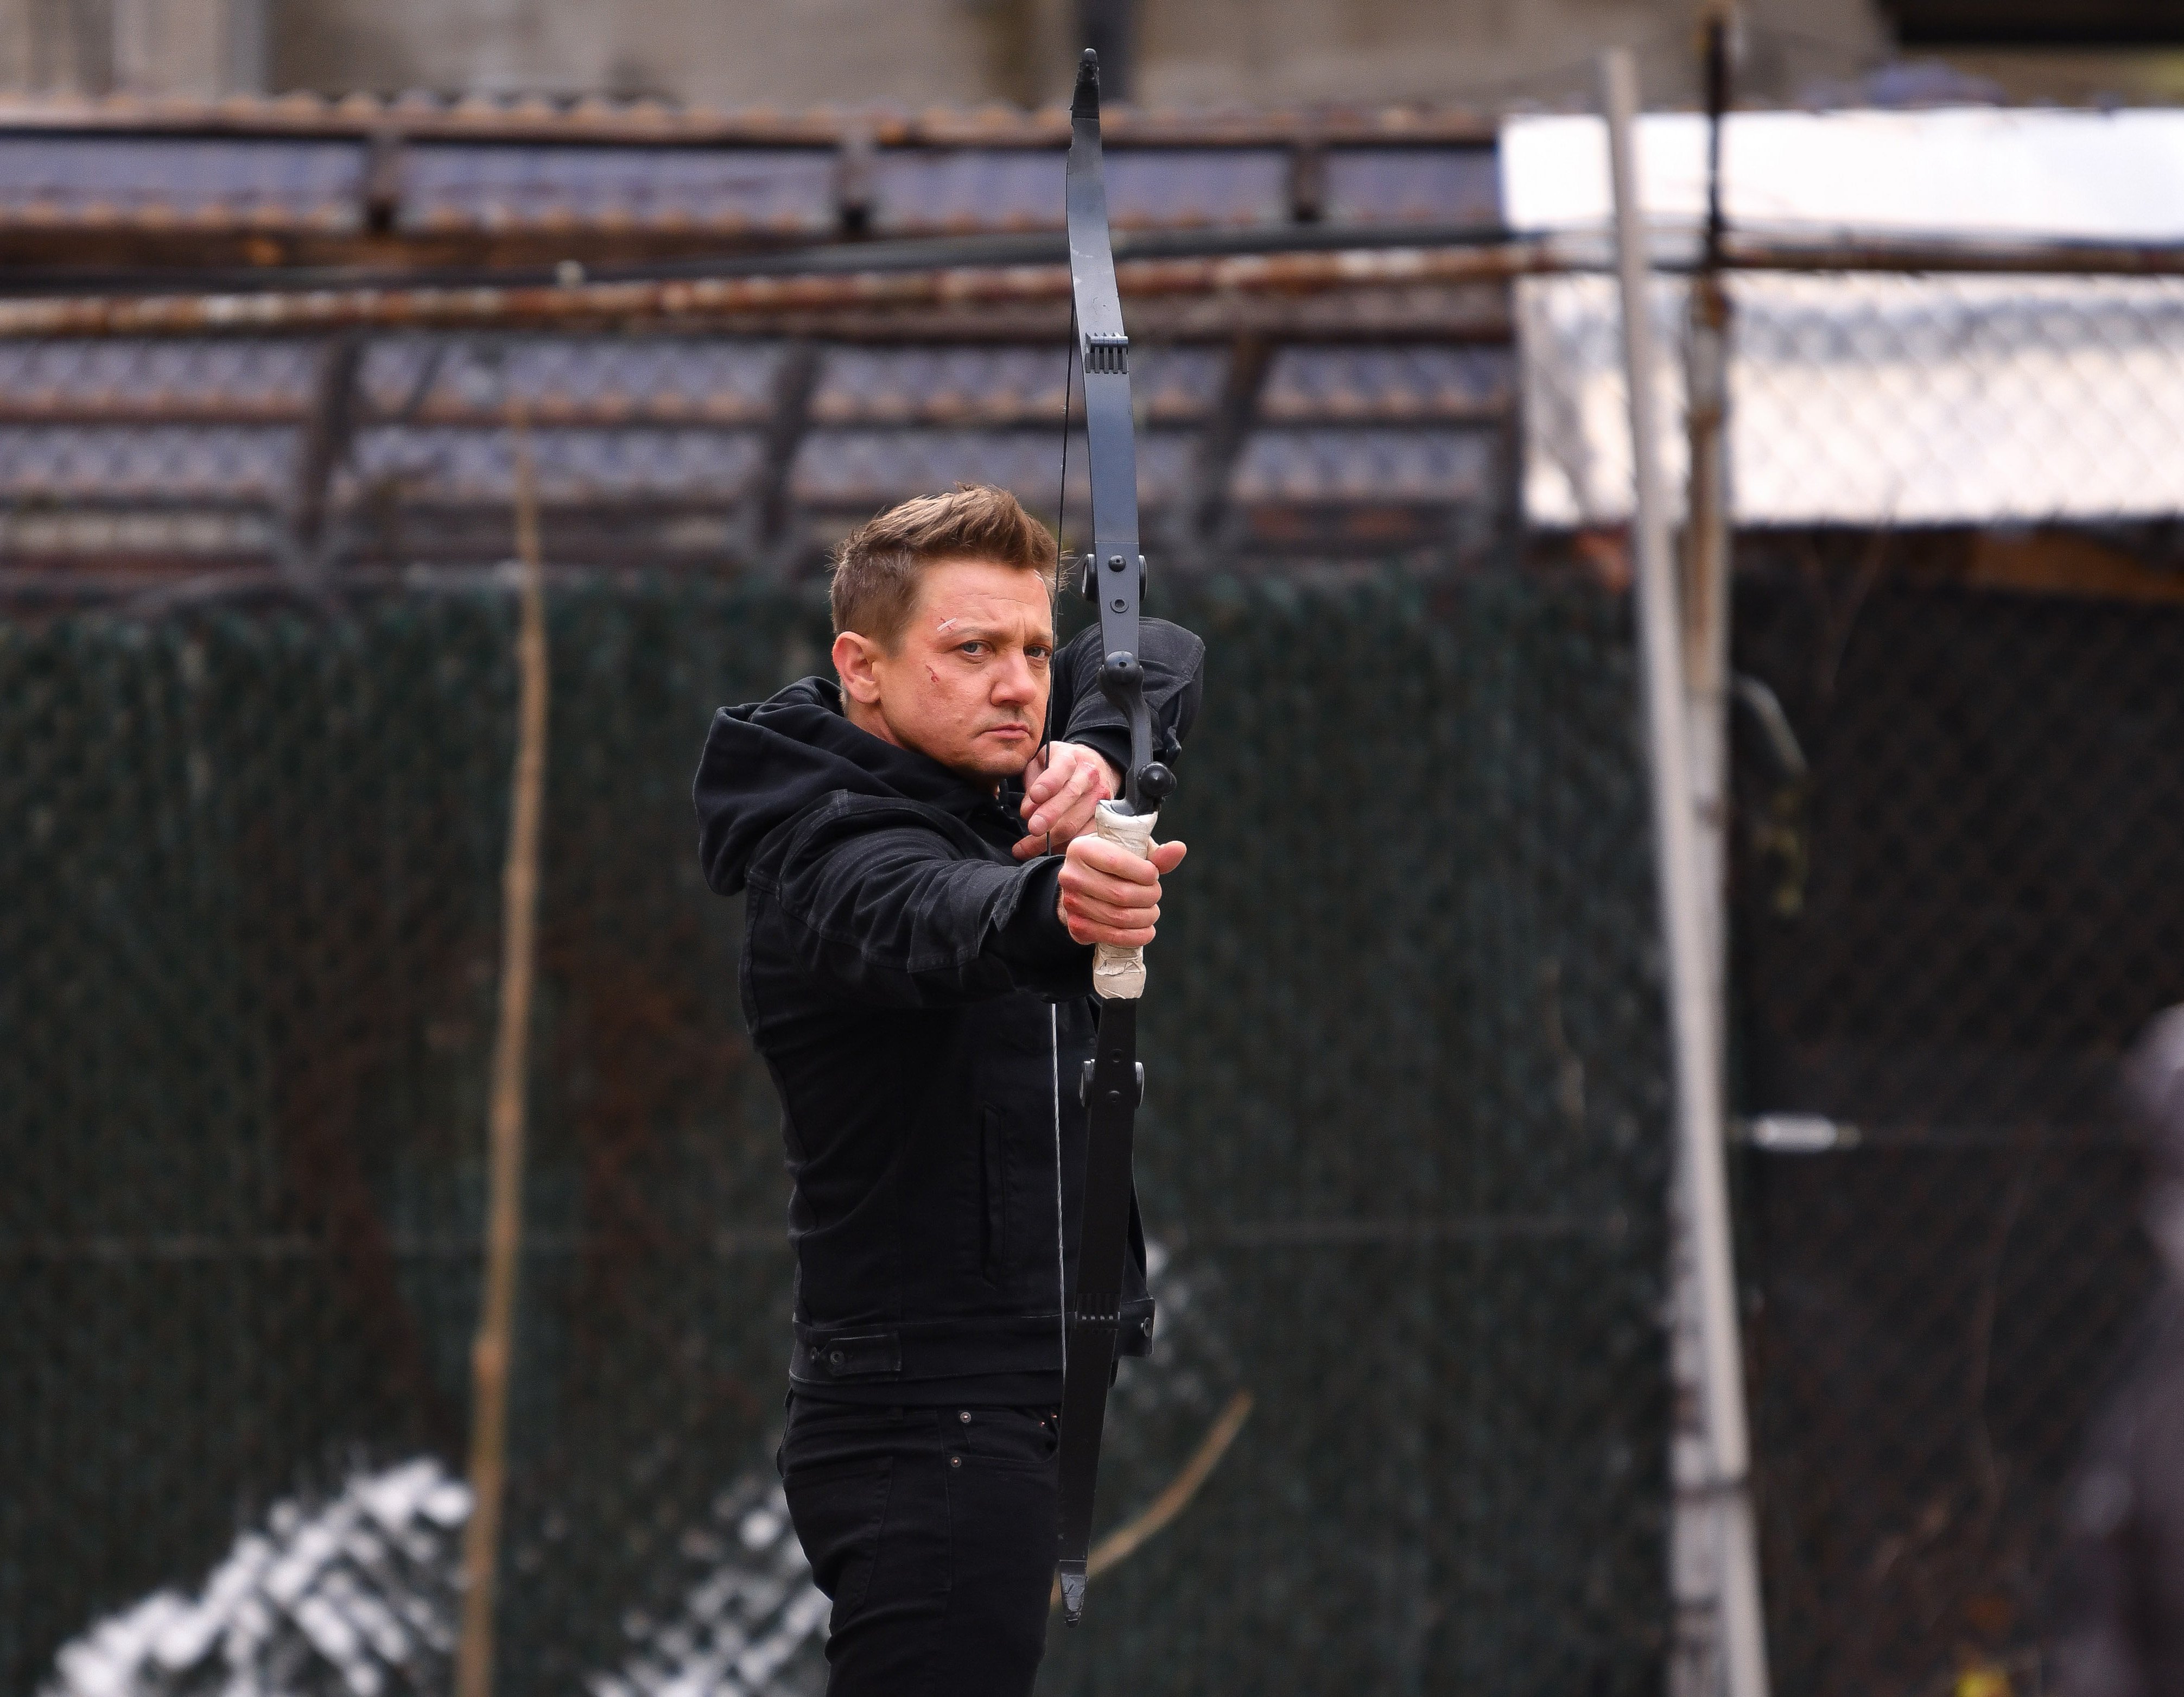 'Hawkeye' star Jeremy Renner, in character as Clint Barton, wears a black jacket over a black hoodie and black pants as his costume. He also wields a bow.